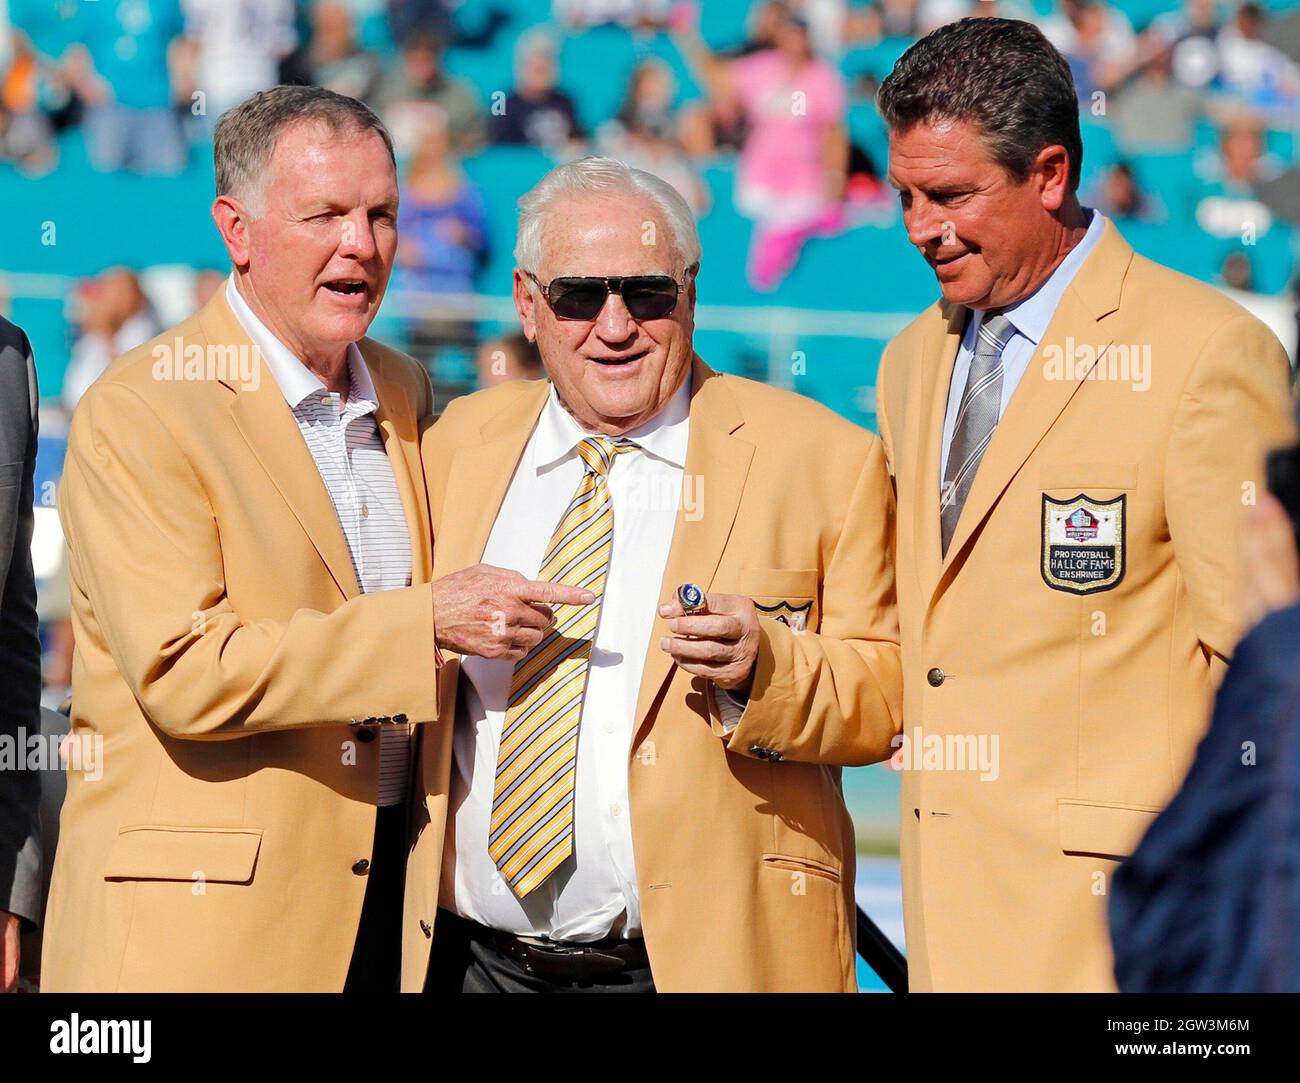 Miami, USA. 22nd Nov, 2015. Hall of Fame coach Don Shula is presented with a new Hall of Fame ring at halftime while flanked by fellow Dolphin Hall of Famers Bob Griese, left, and Dan Marino, right, during a ceremony at Sun Life Stadium on Nov. 22, 2015, in Miami. (Photo by Al Diaz/Miami Herald/TNS/Sipa USA) Credit: Sipa USA/Alamy Live News Stock Photo